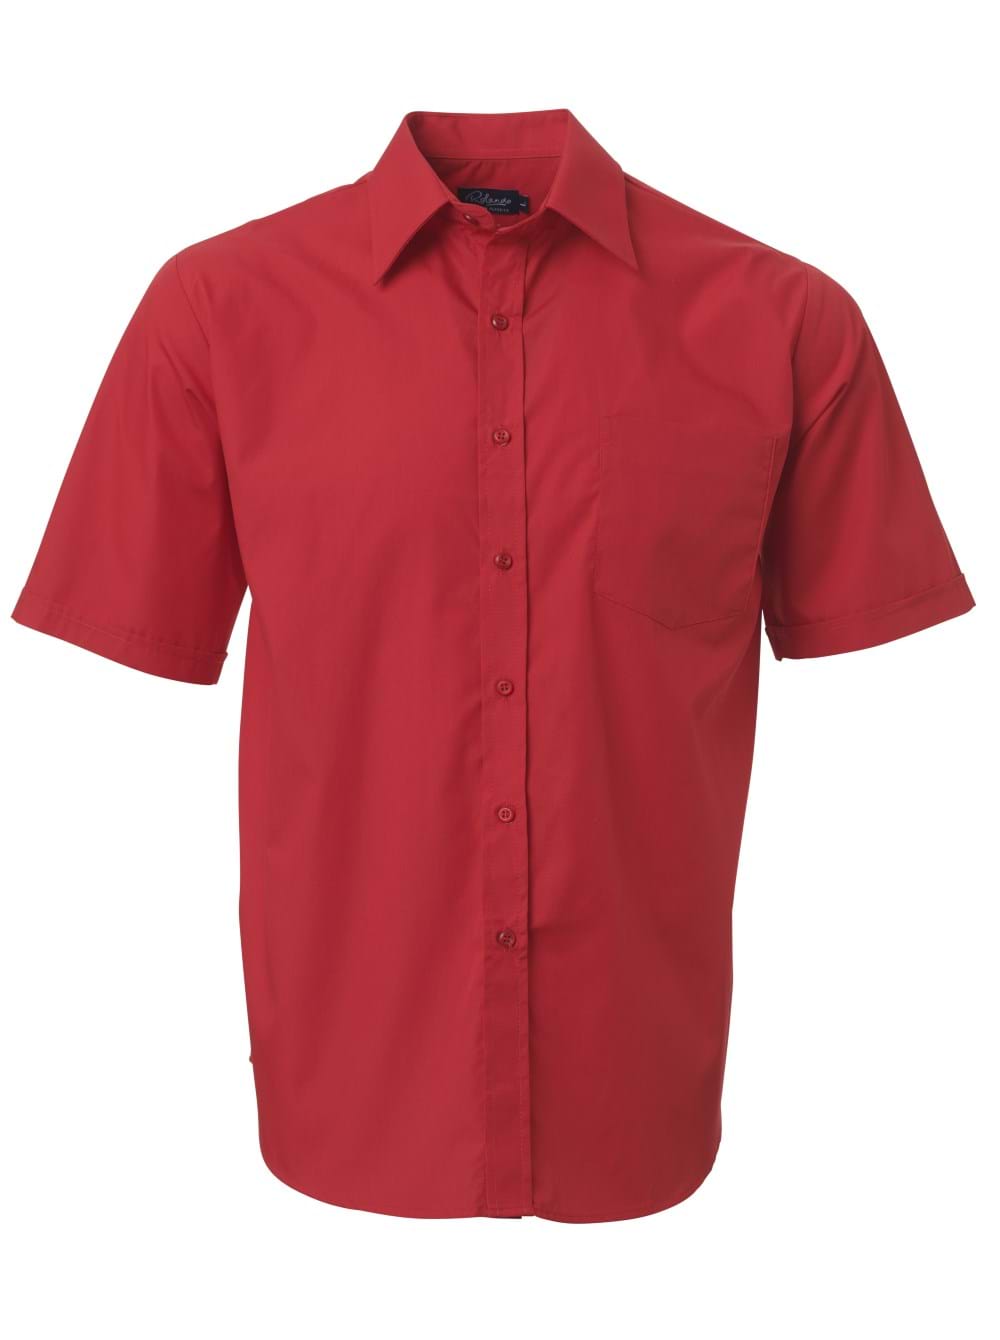 Mens P070 S/S Shirt - Red / M